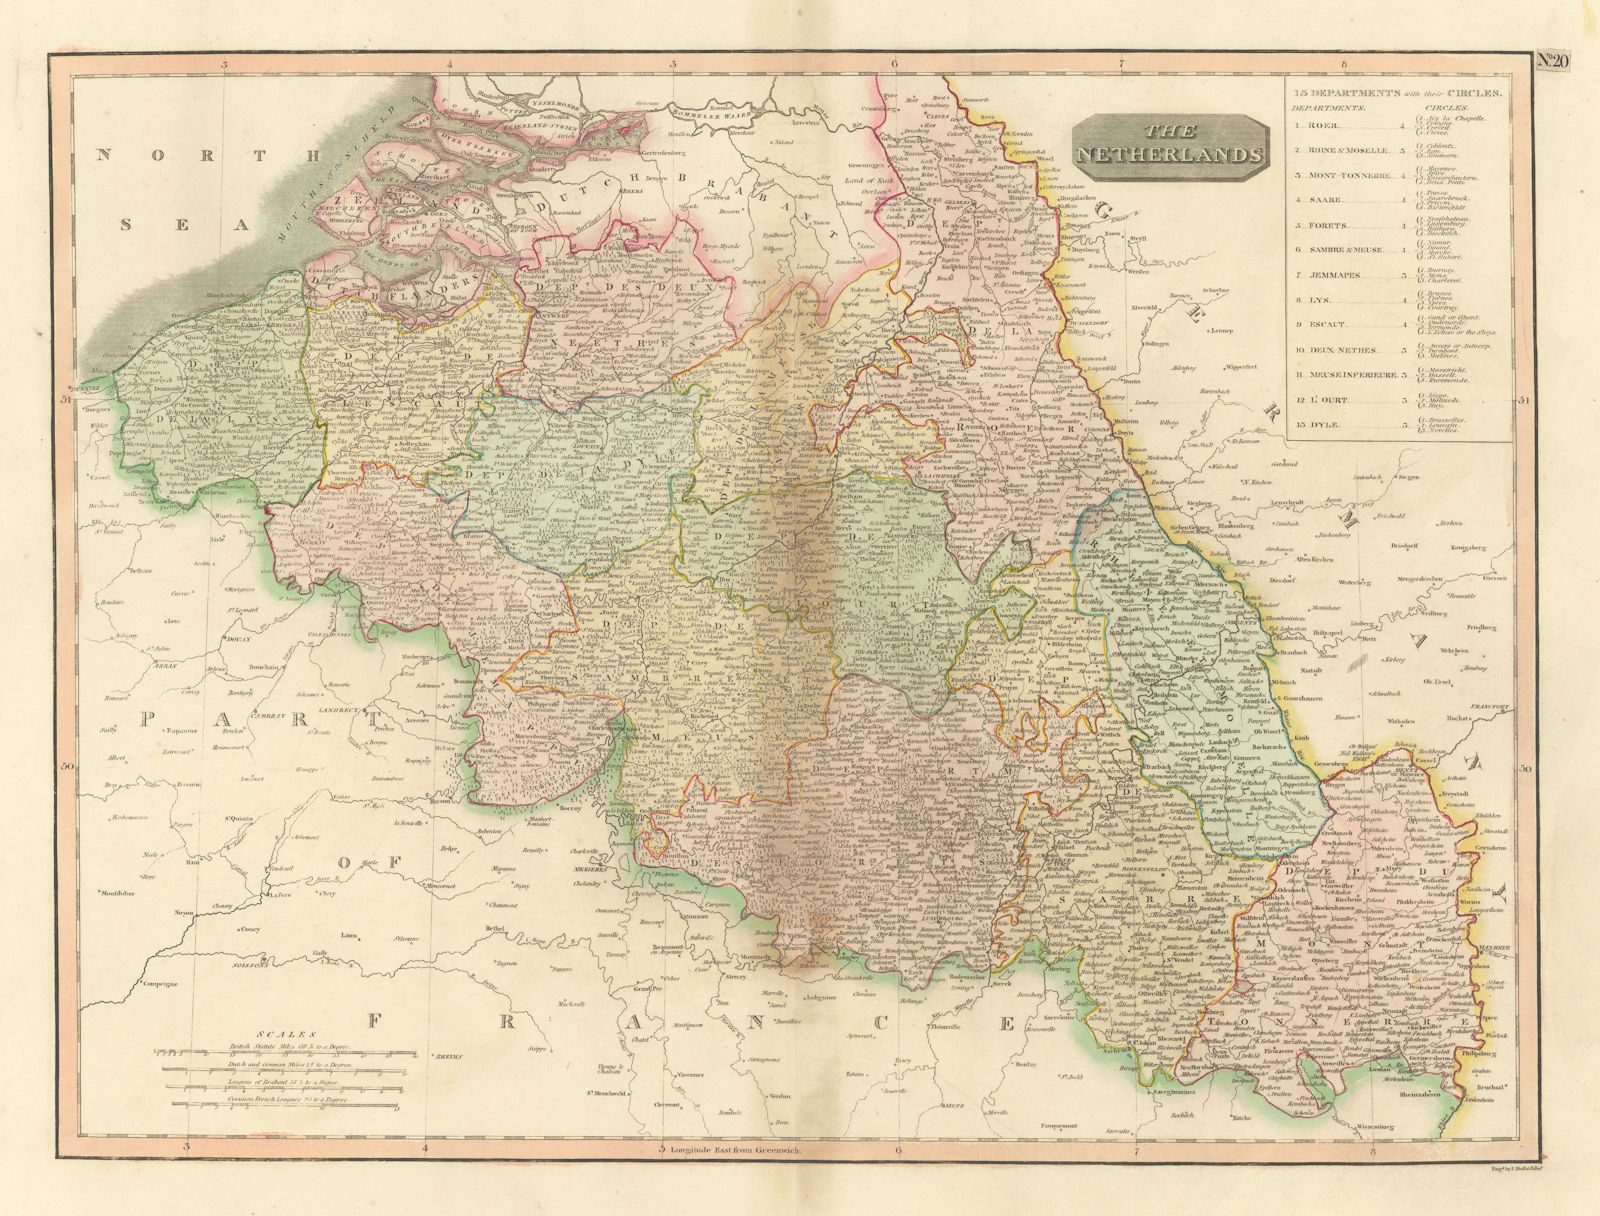 "The Netherlands". French-ruled Belgium with 13 Départements. THOMSON 1817 map